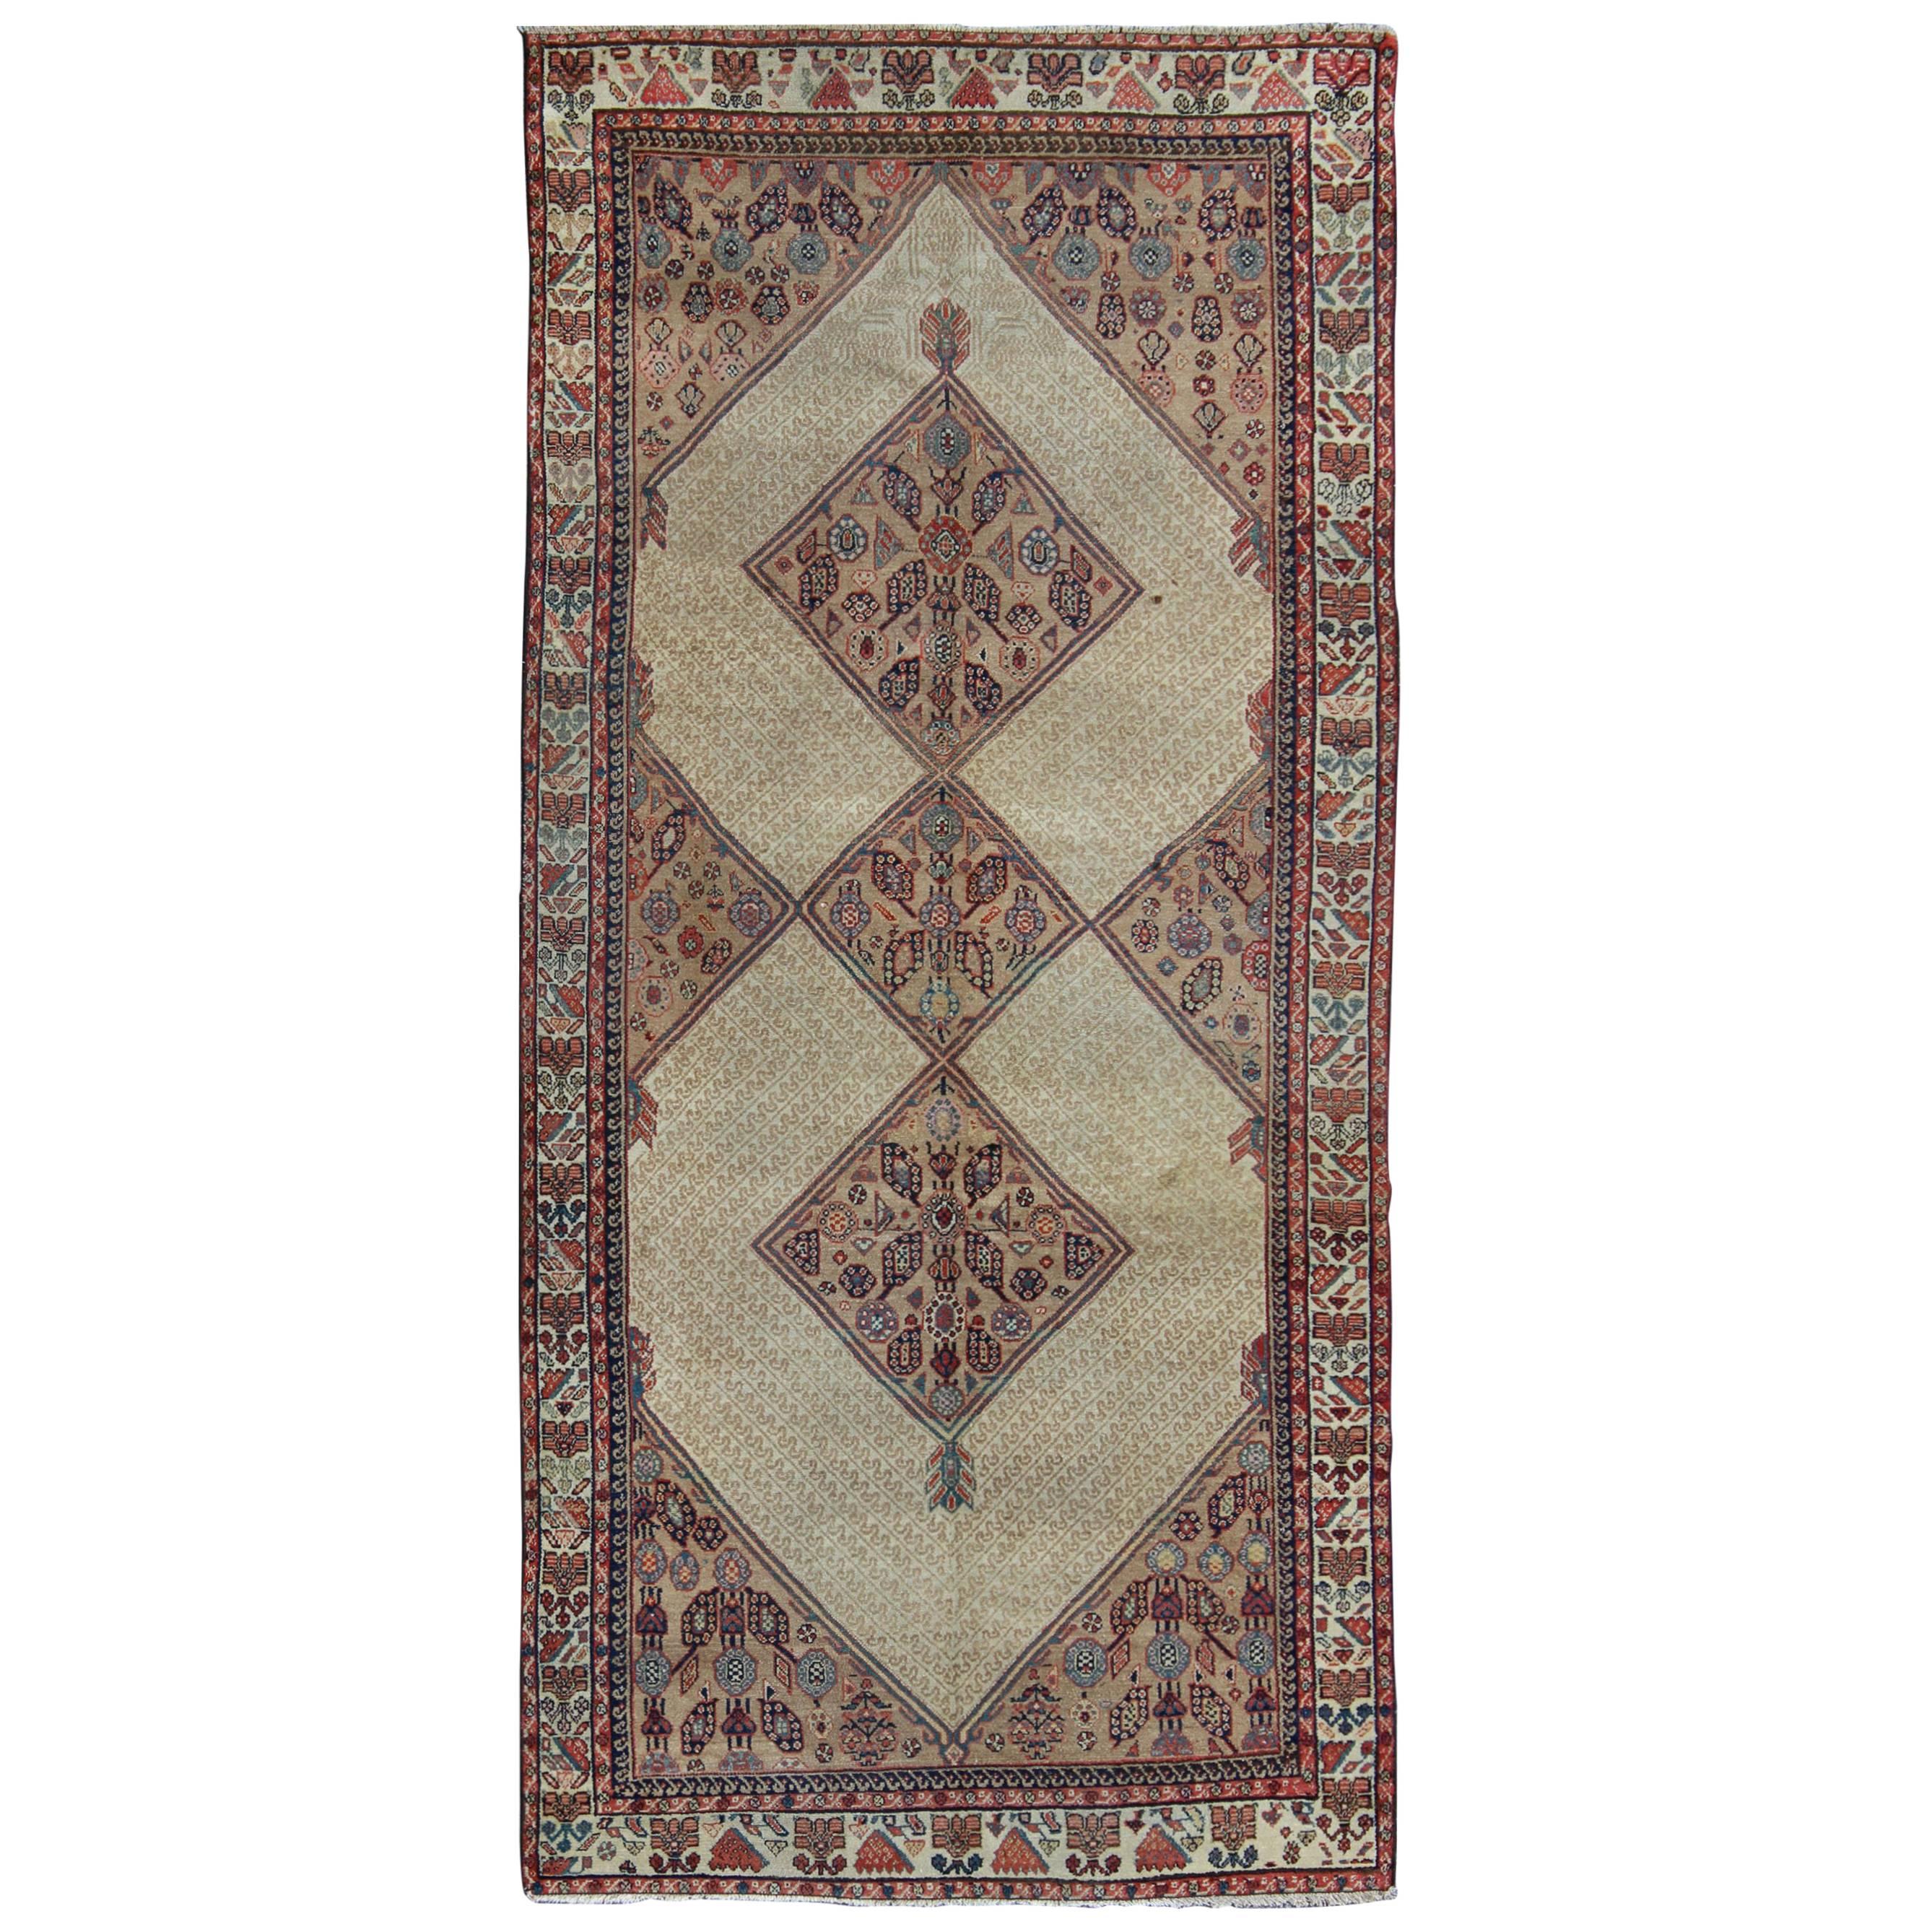 Antique Persian Serab Runner with Tribal Geometric Pattern in Camel, Red & Blue